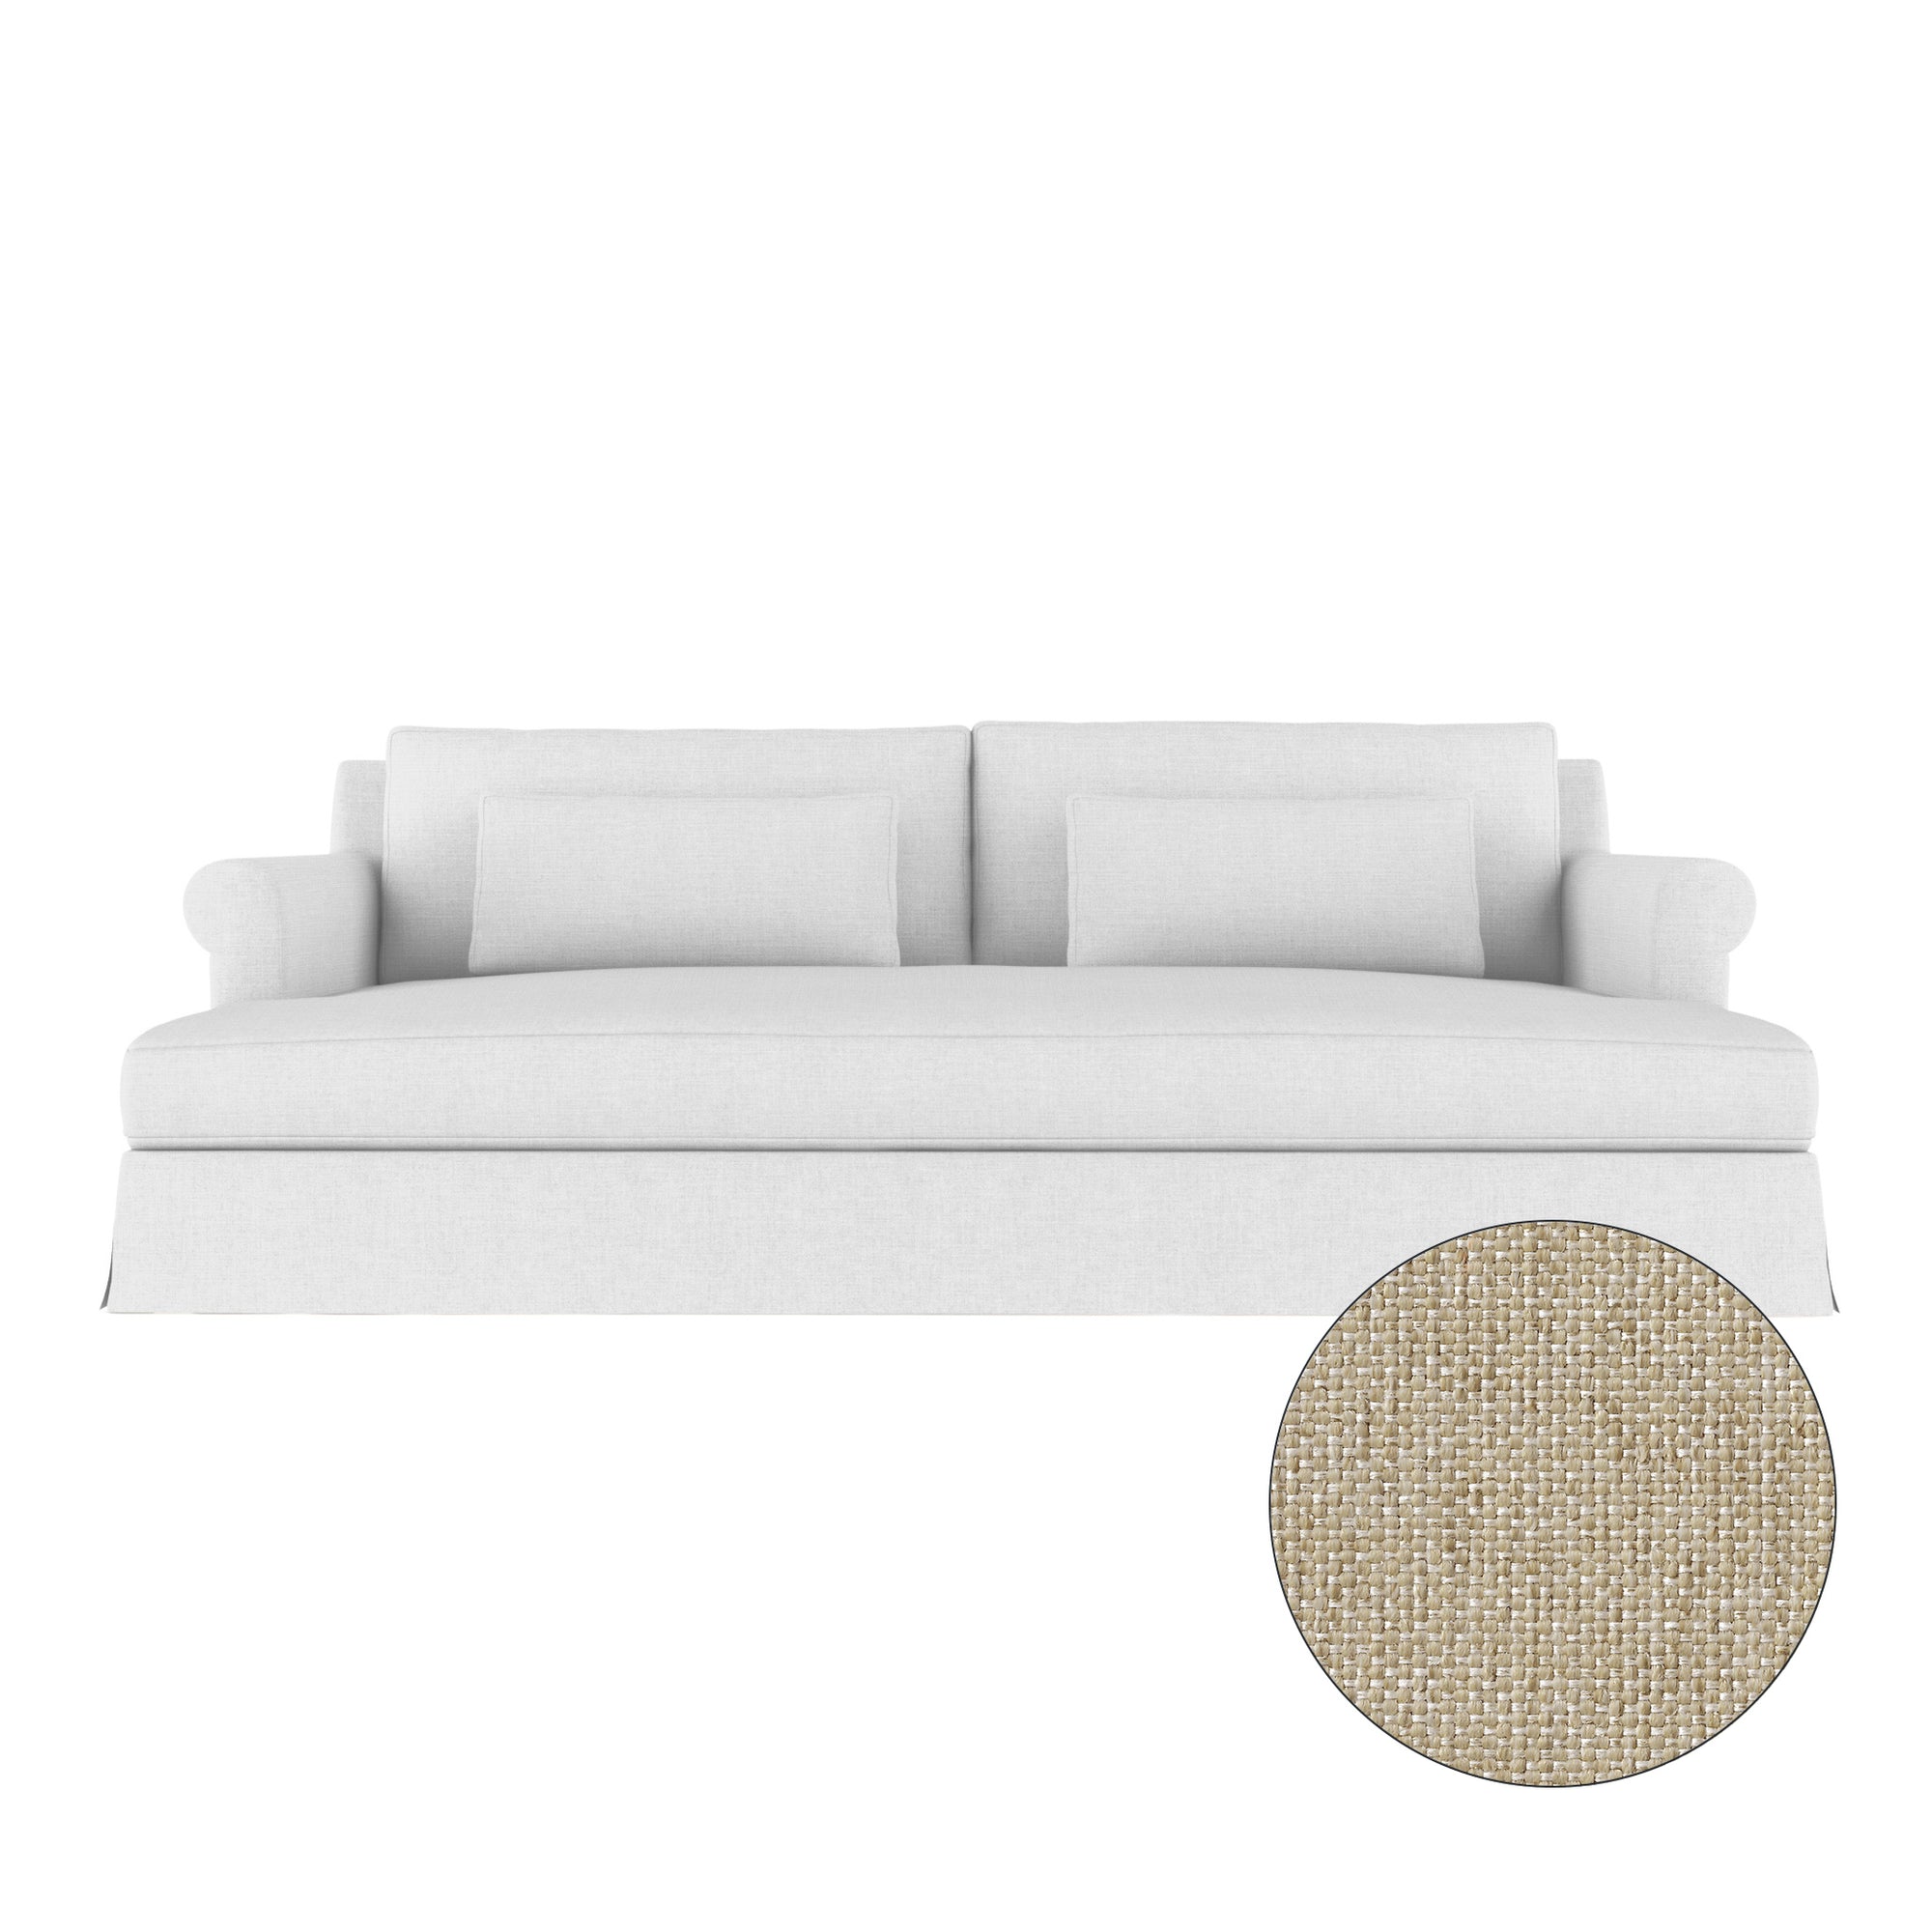 Ludlow Daybed - Oyster Pebble Weave Linen